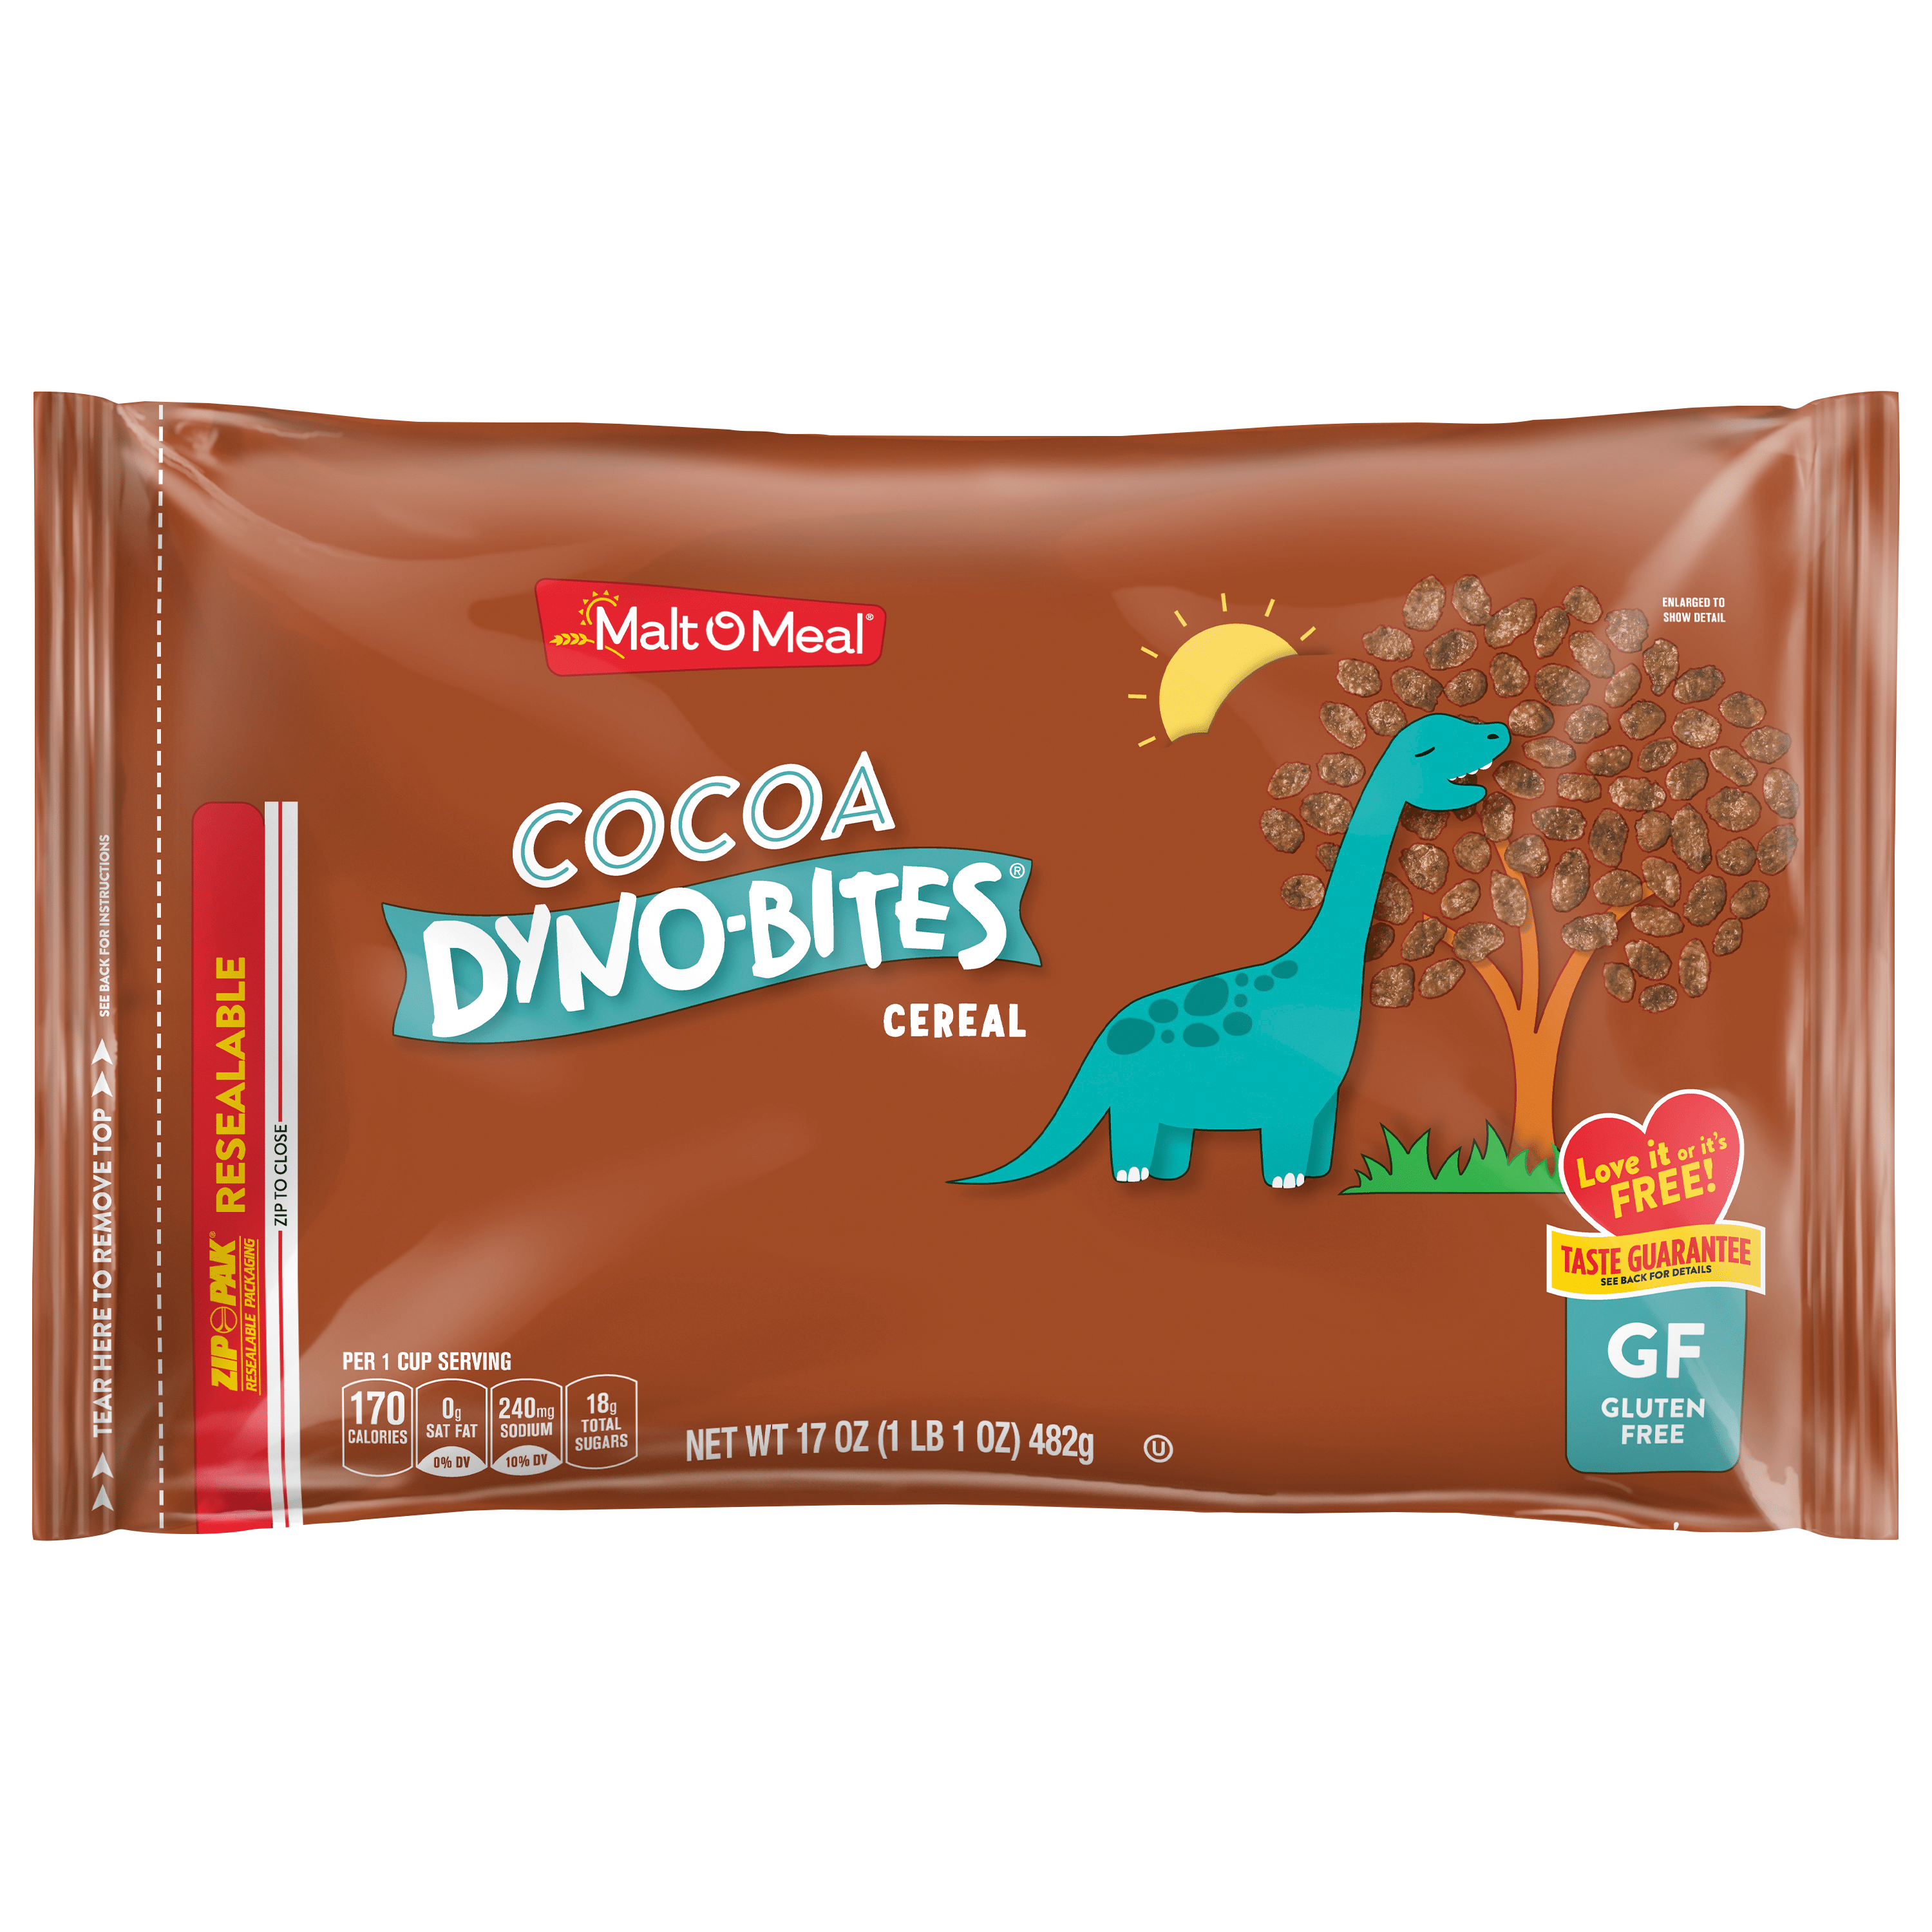 A bag of Cocoa Dino-Bytes cereal